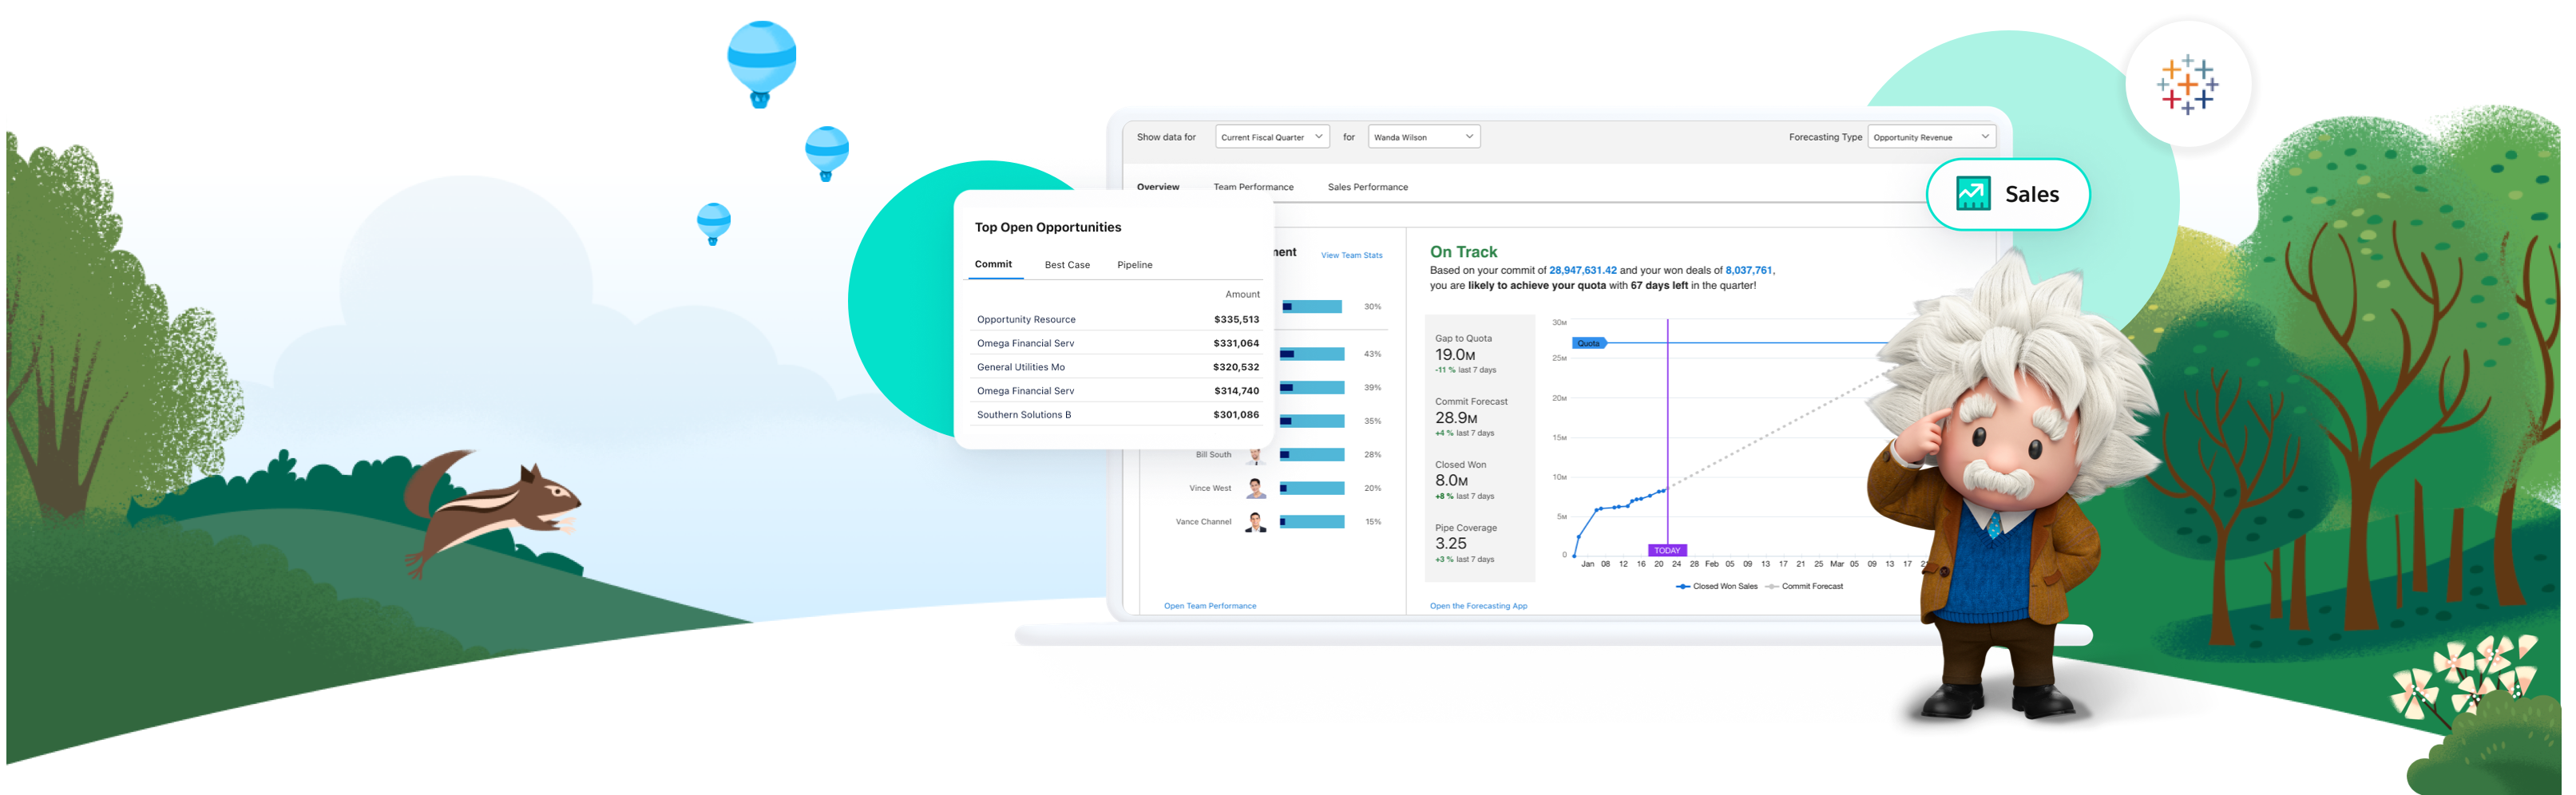  Image from Einstein character, showing the Revenue intelligence dashboard and top opportunities